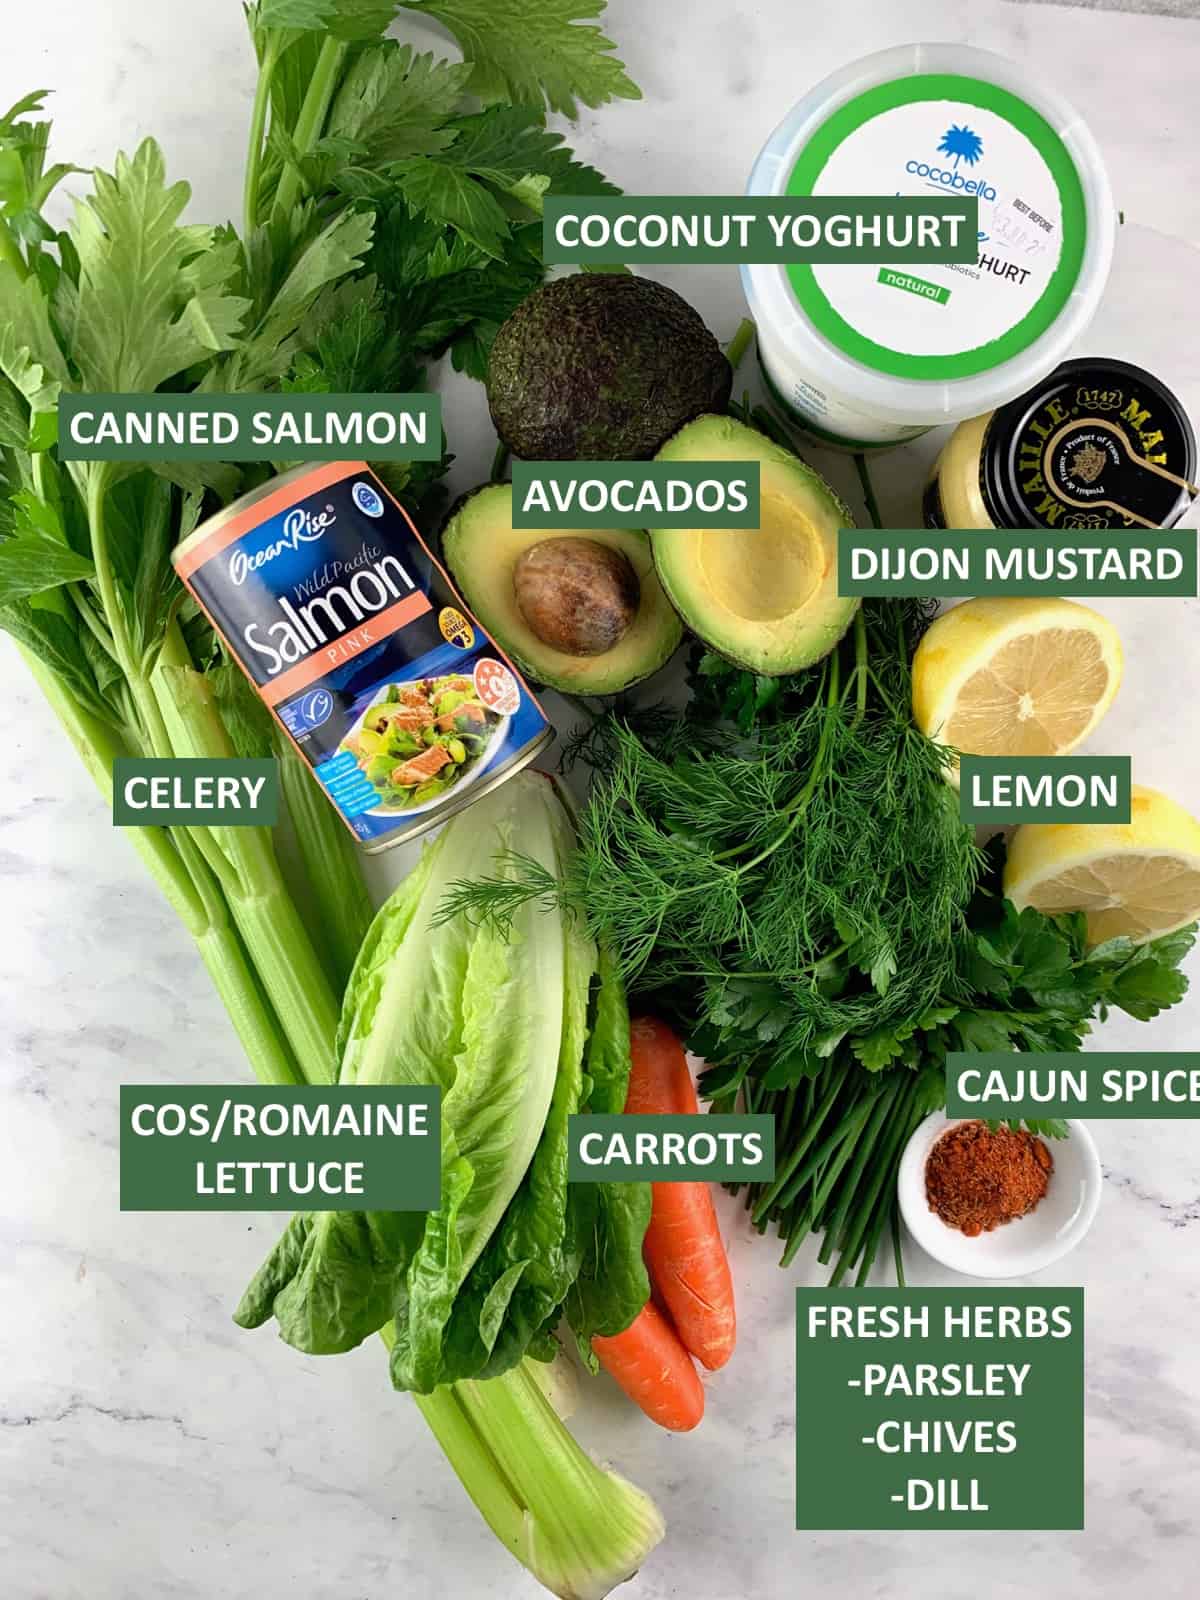 INGREDIENTS FOR CANNED SALMON SALAD WITH TEXT